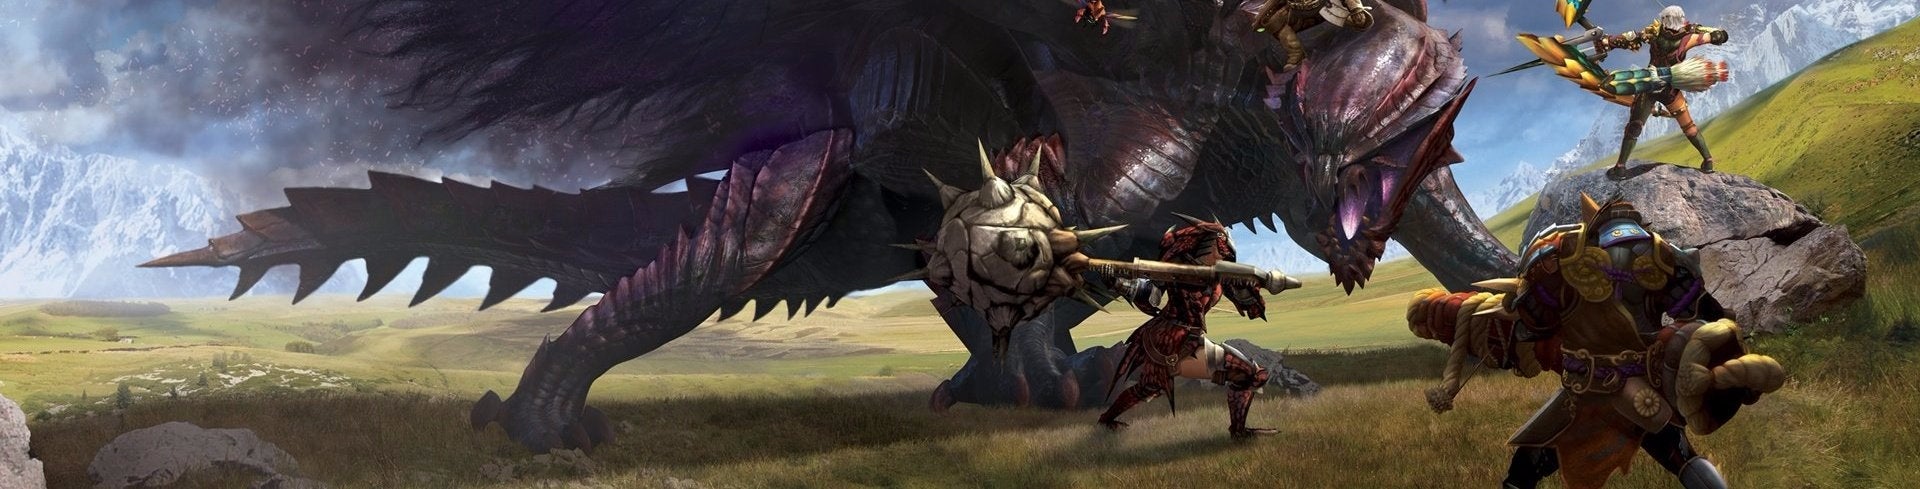 Image for Games of 2015 no. 8: Monster Hunter 4 Ultimate